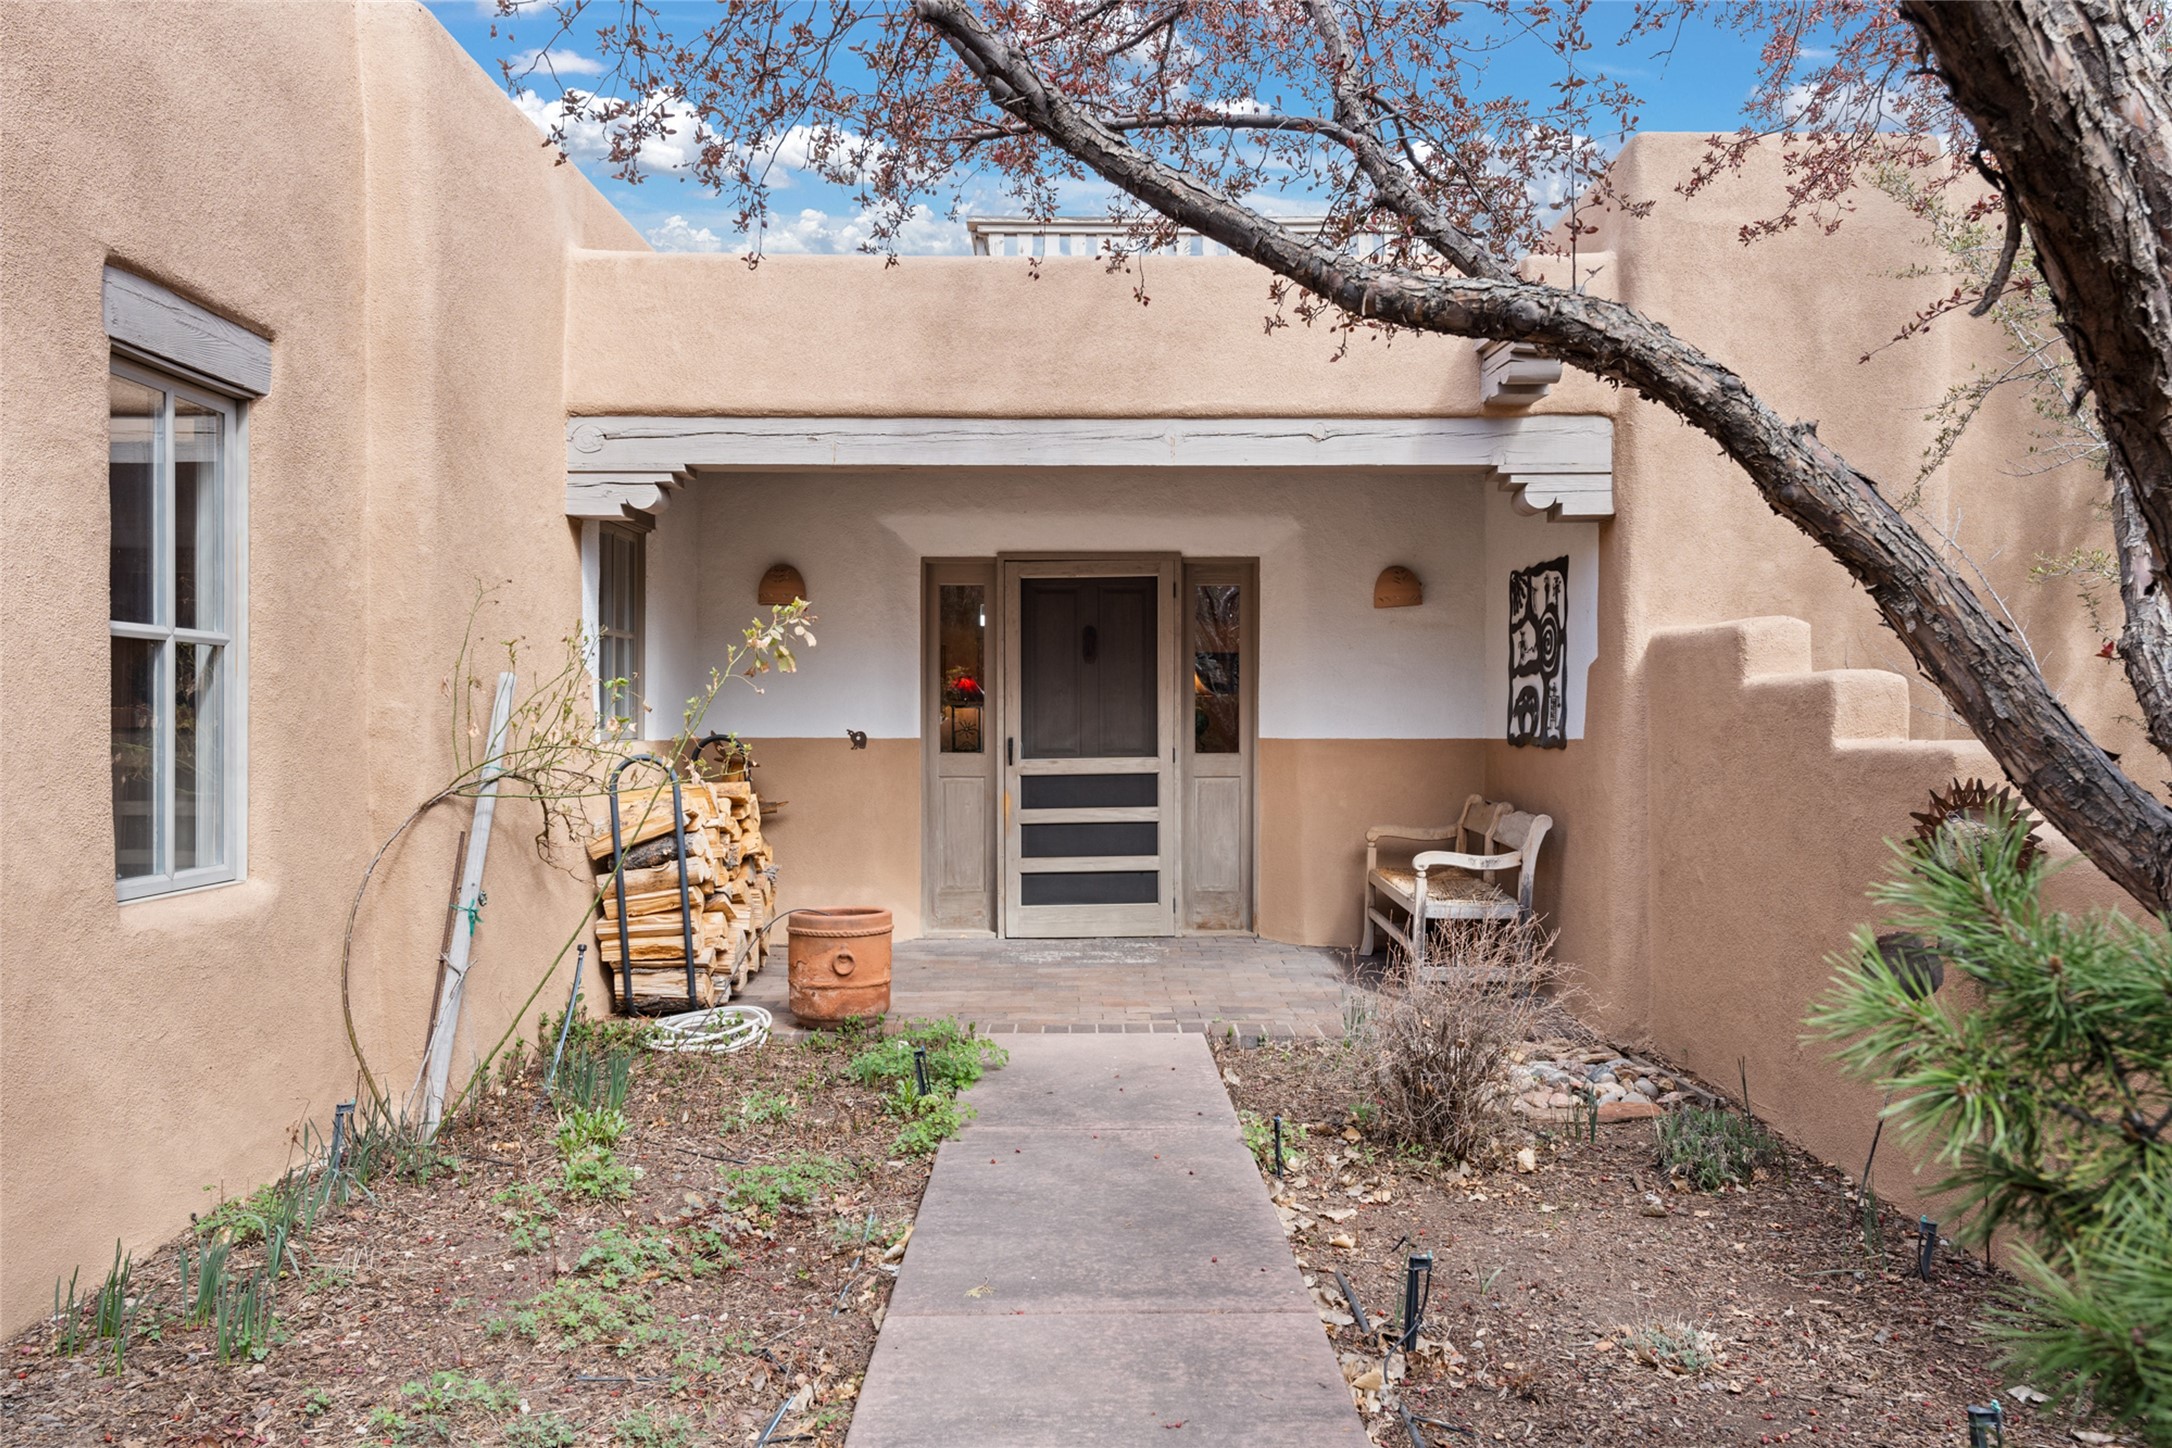 3101 Old Pecos Trail 673, Santa Fe, New Mexico 87505, 2 Bedrooms Bedrooms, ,2 BathroomsBathrooms,Residential,For Sale,3101 Old Pecos Trail 673,202401294